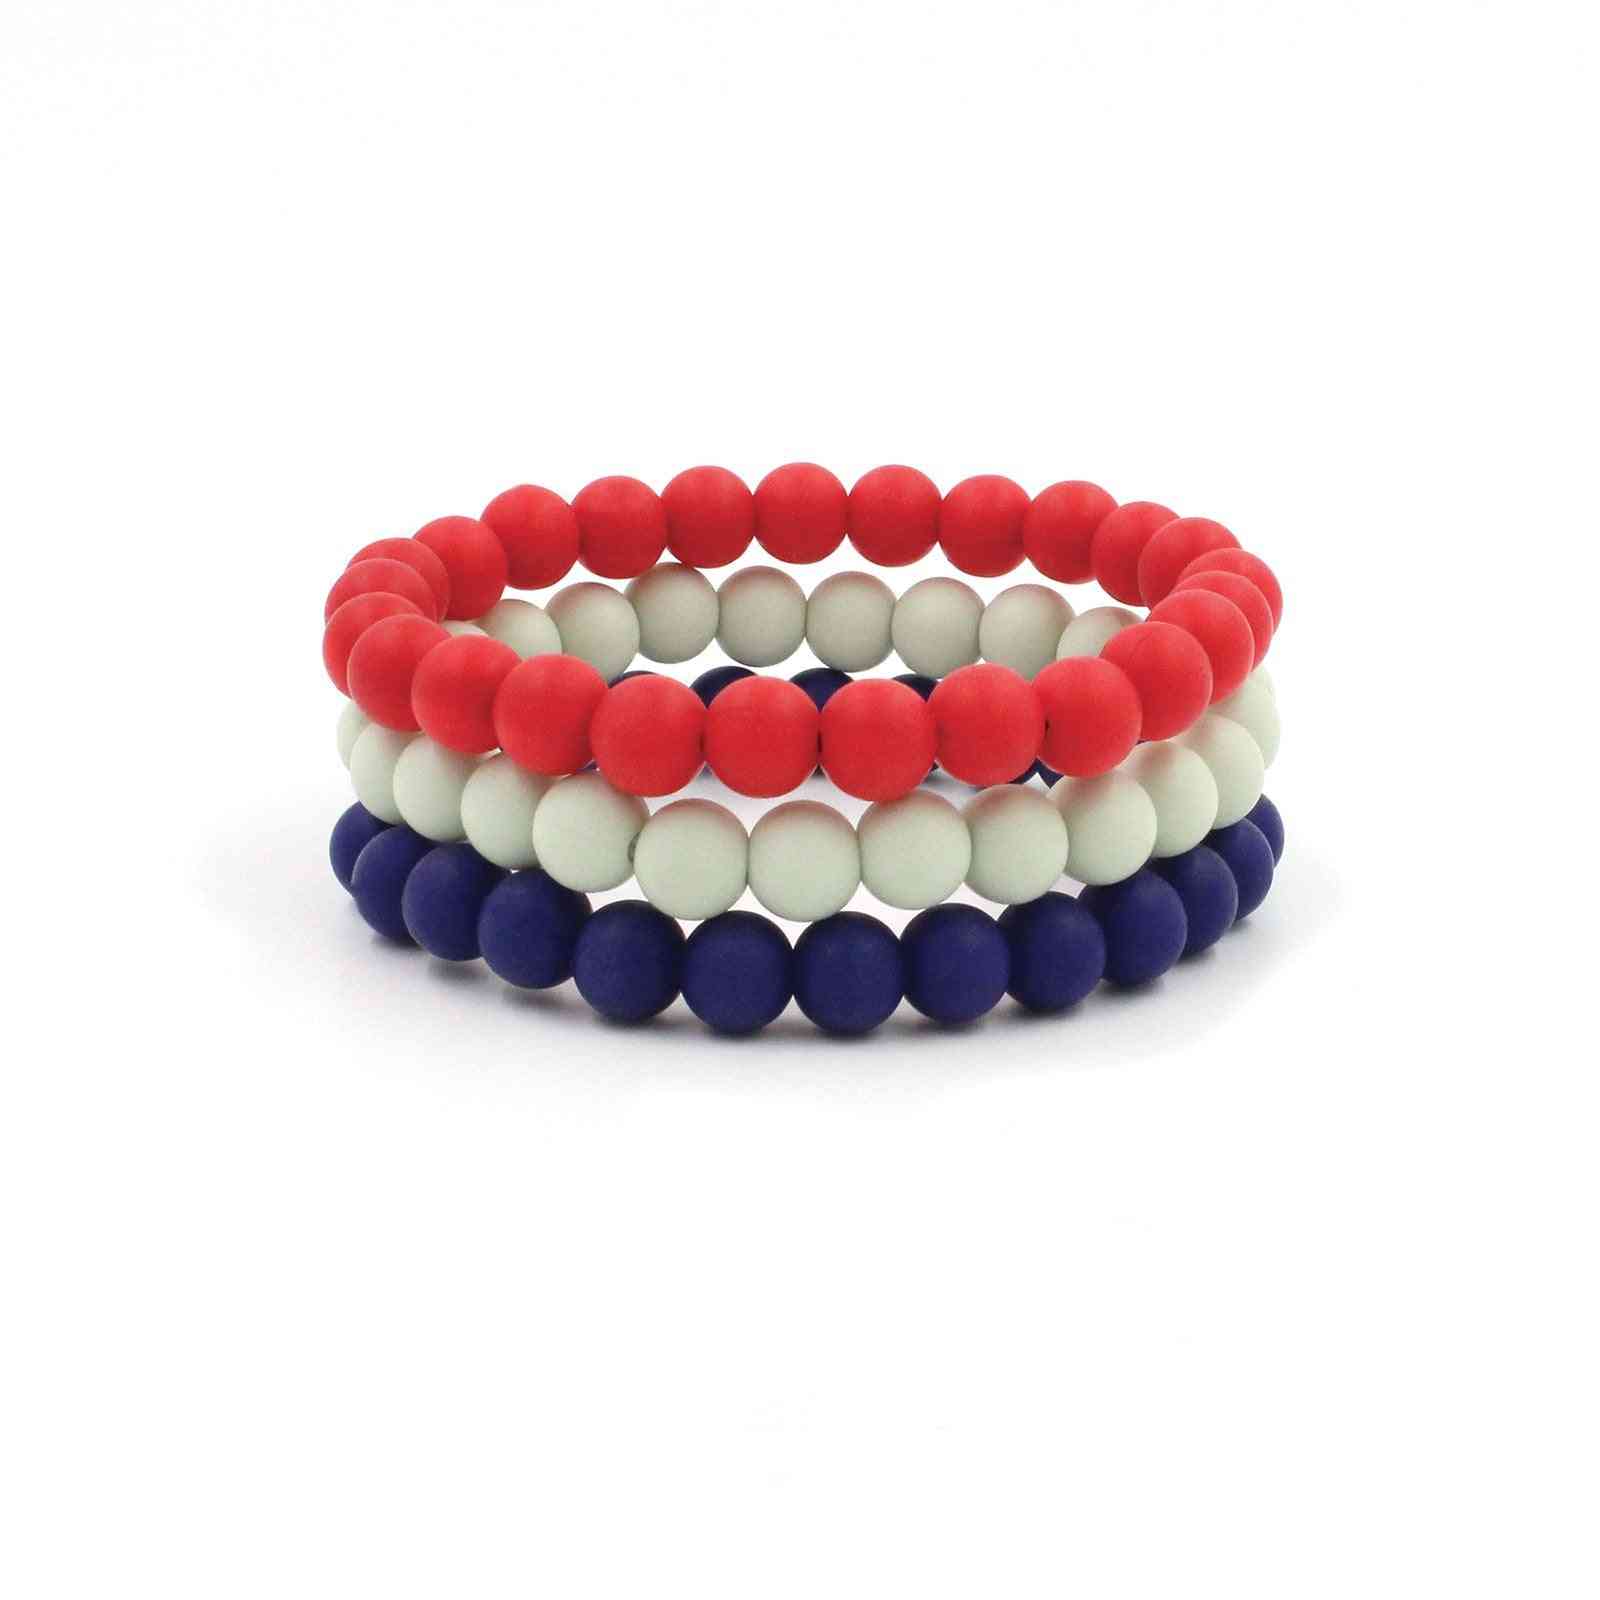 Silicon Rubber, Stretchable Beaded Bracelets